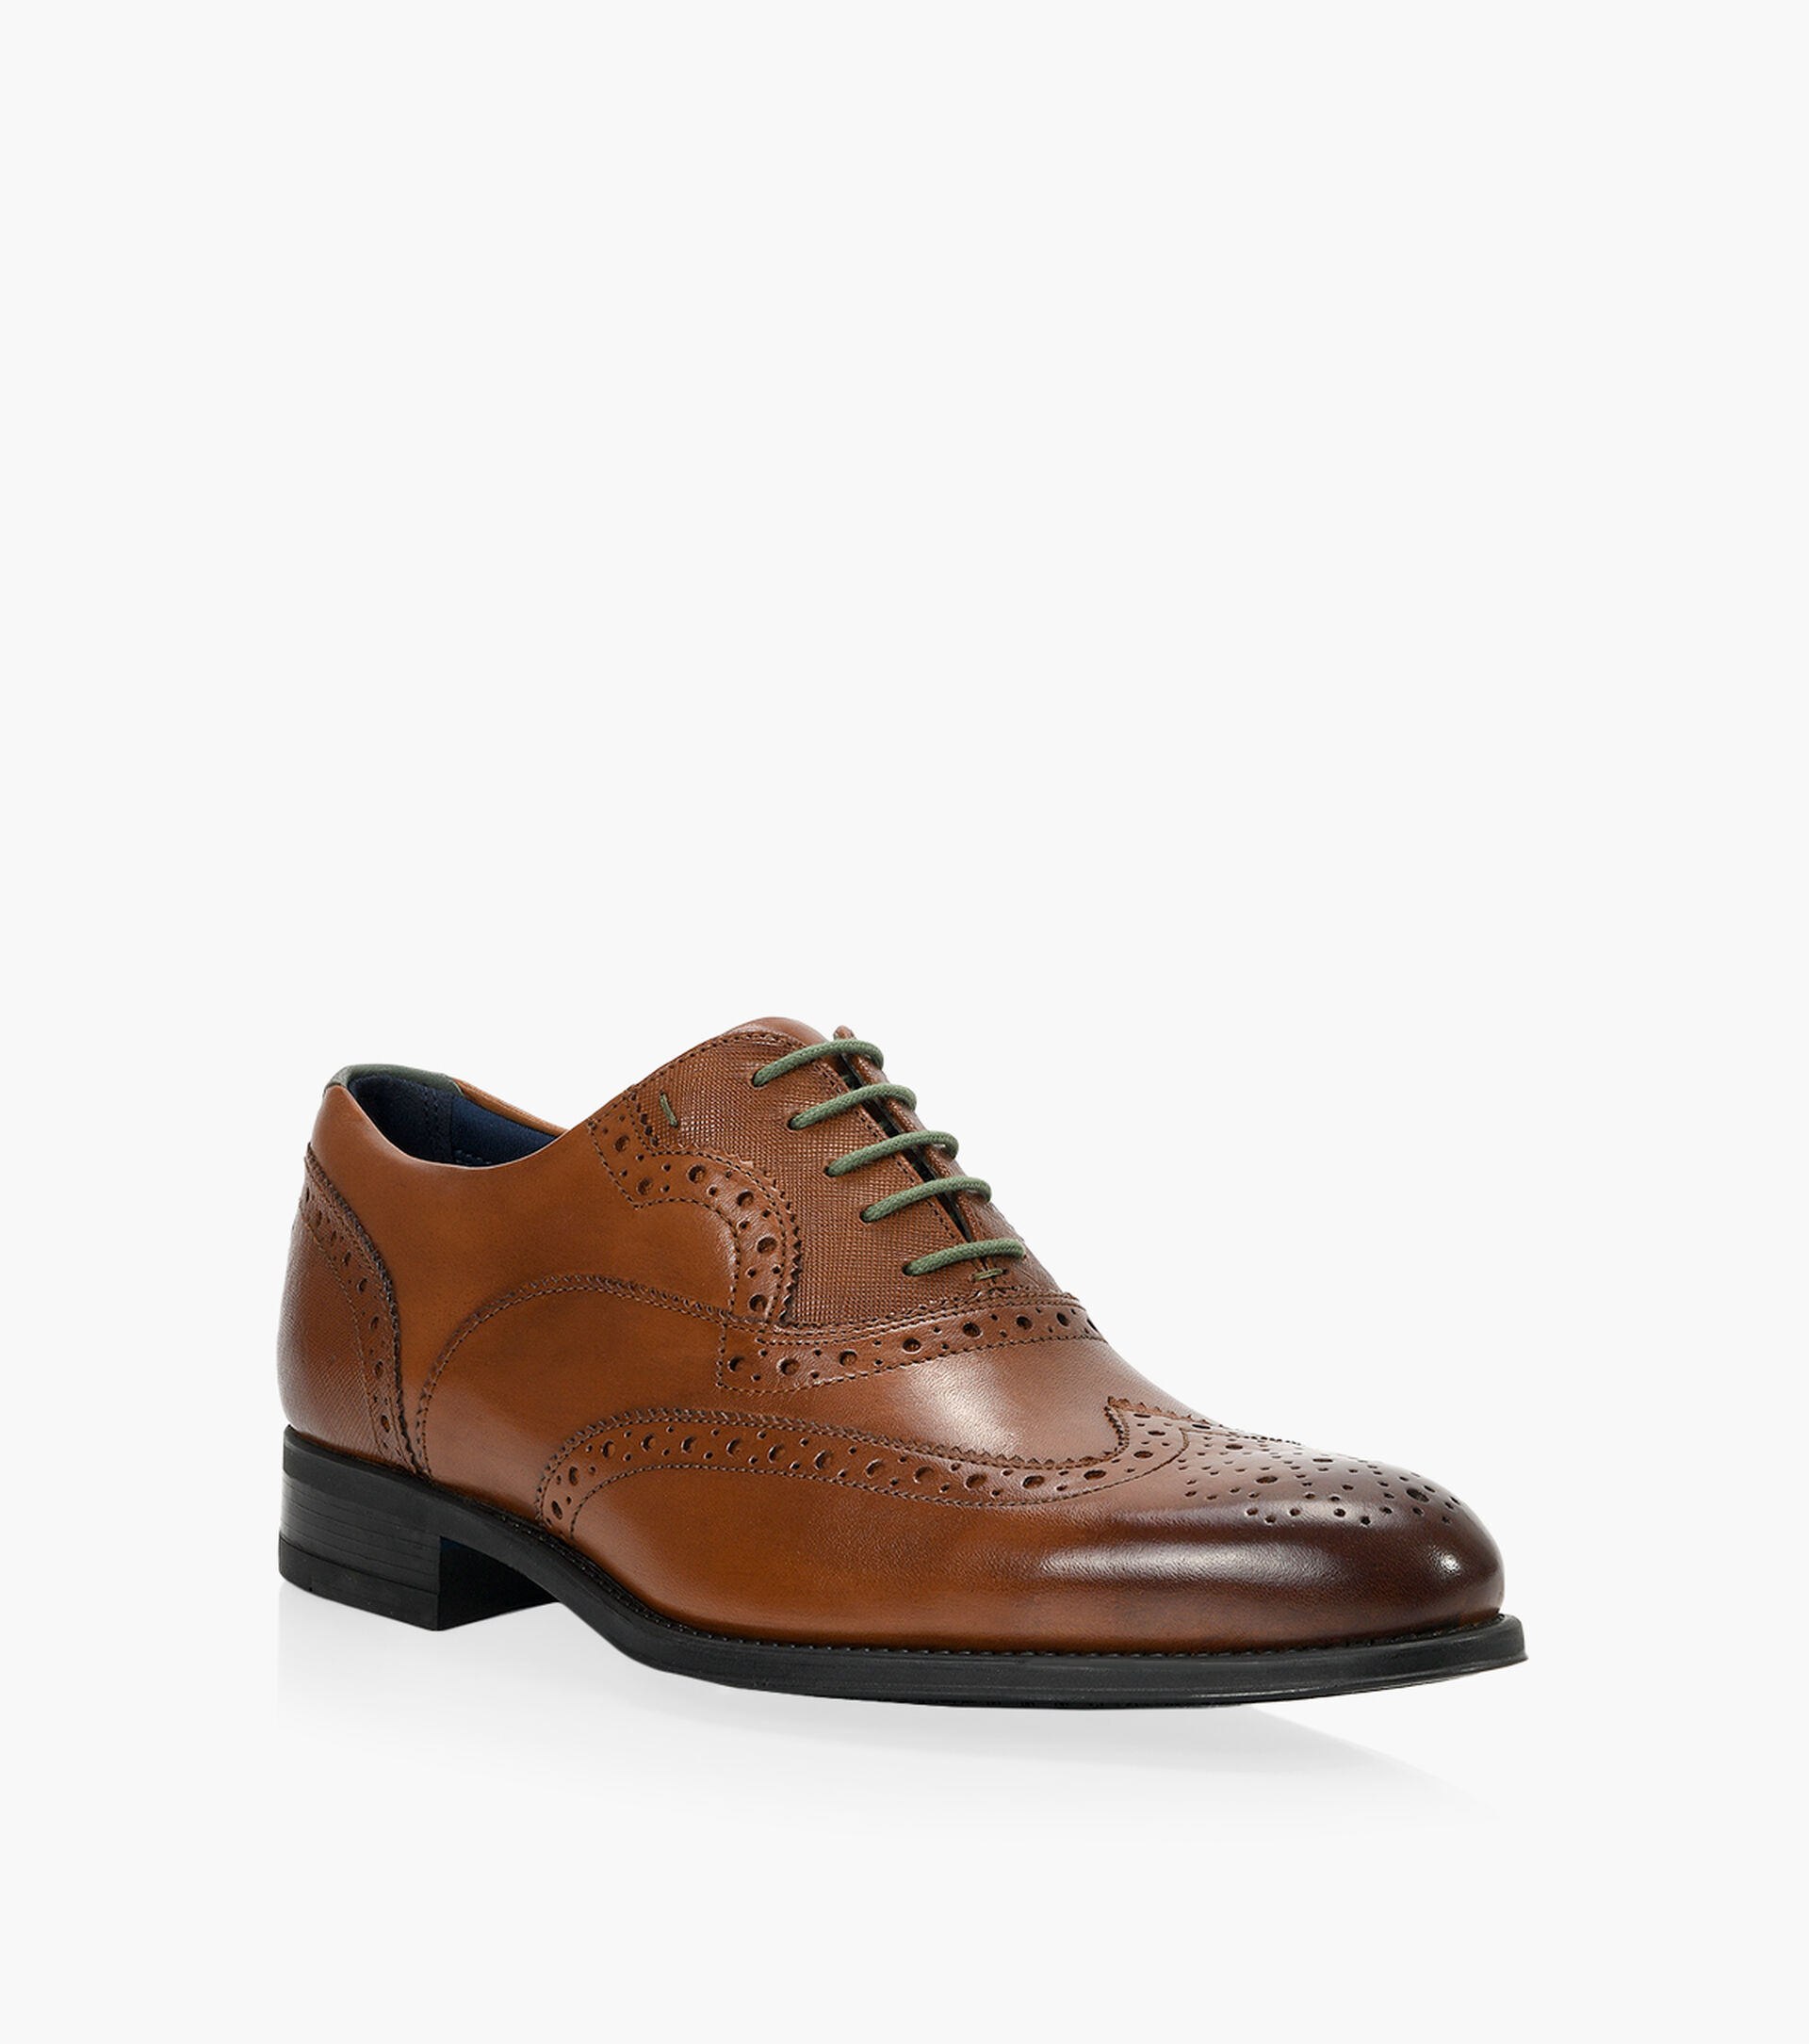 TED BAKER MITTAL - Tan Leather | Browns Shoes